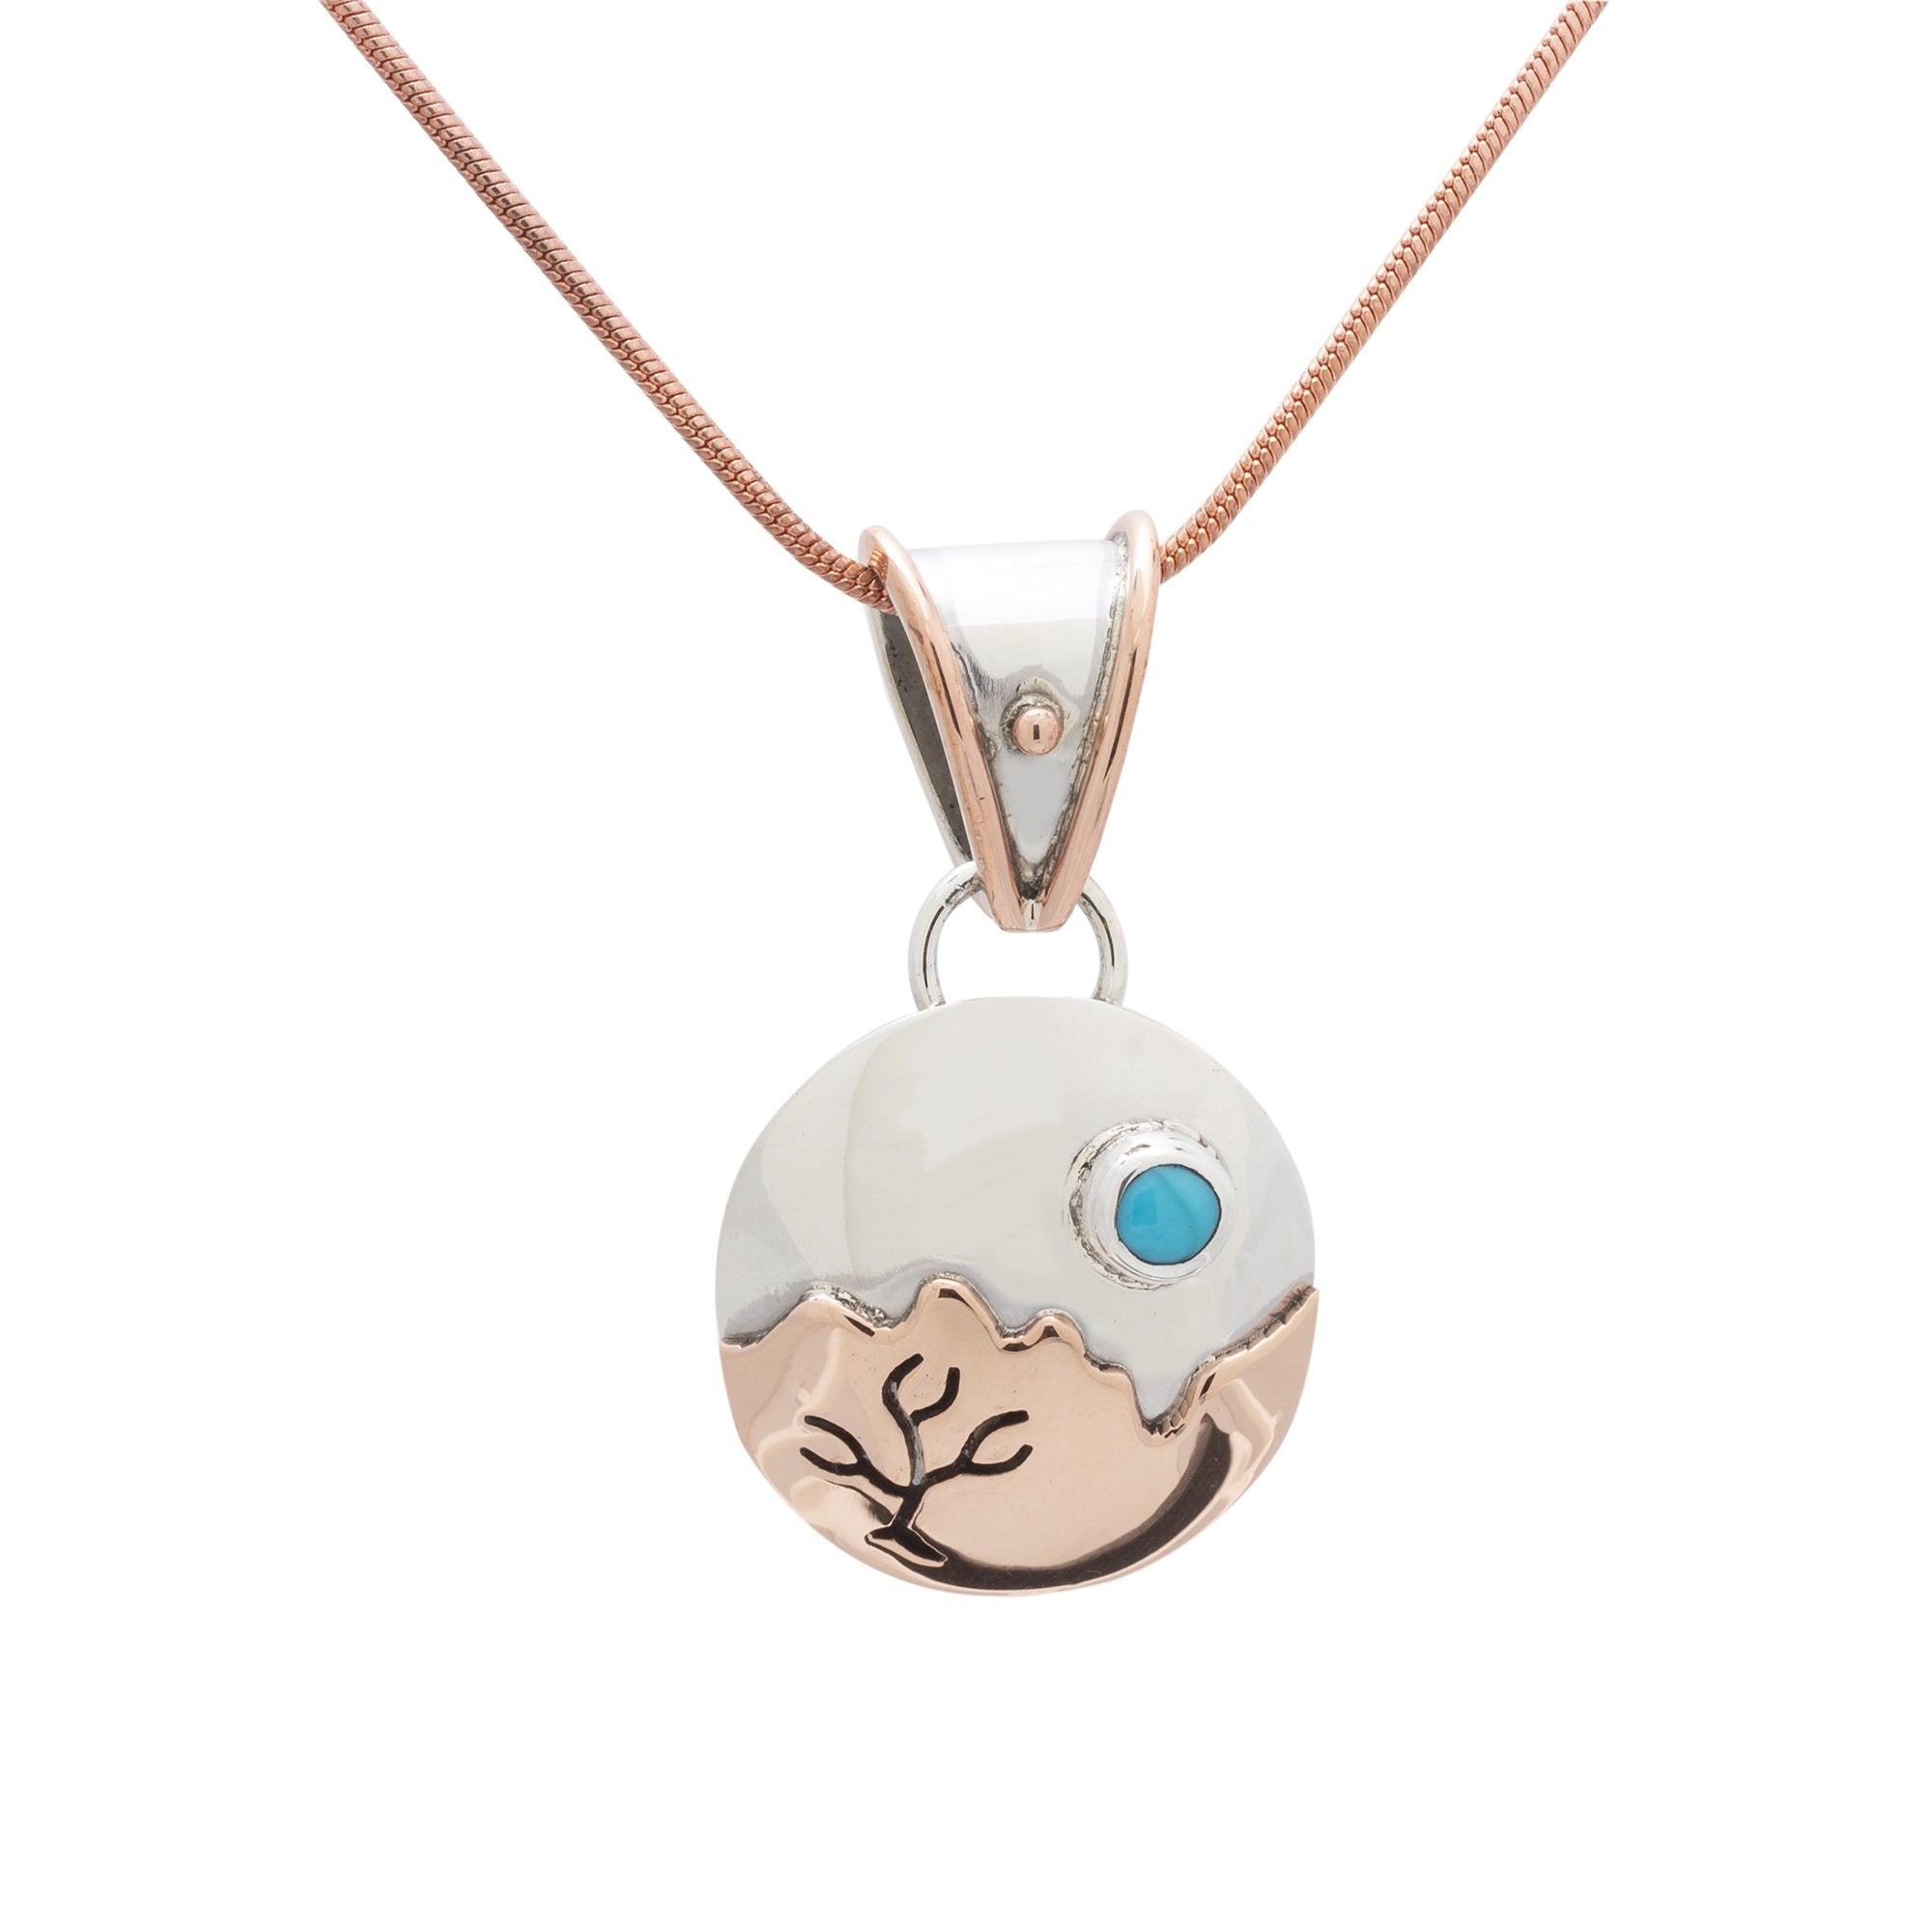 PN.ANG.2108 - Copper Mountain Pendant, Sterling Silver and Copper with Sleeping Beauty Turquoise Pendant - PN.ANG.2108